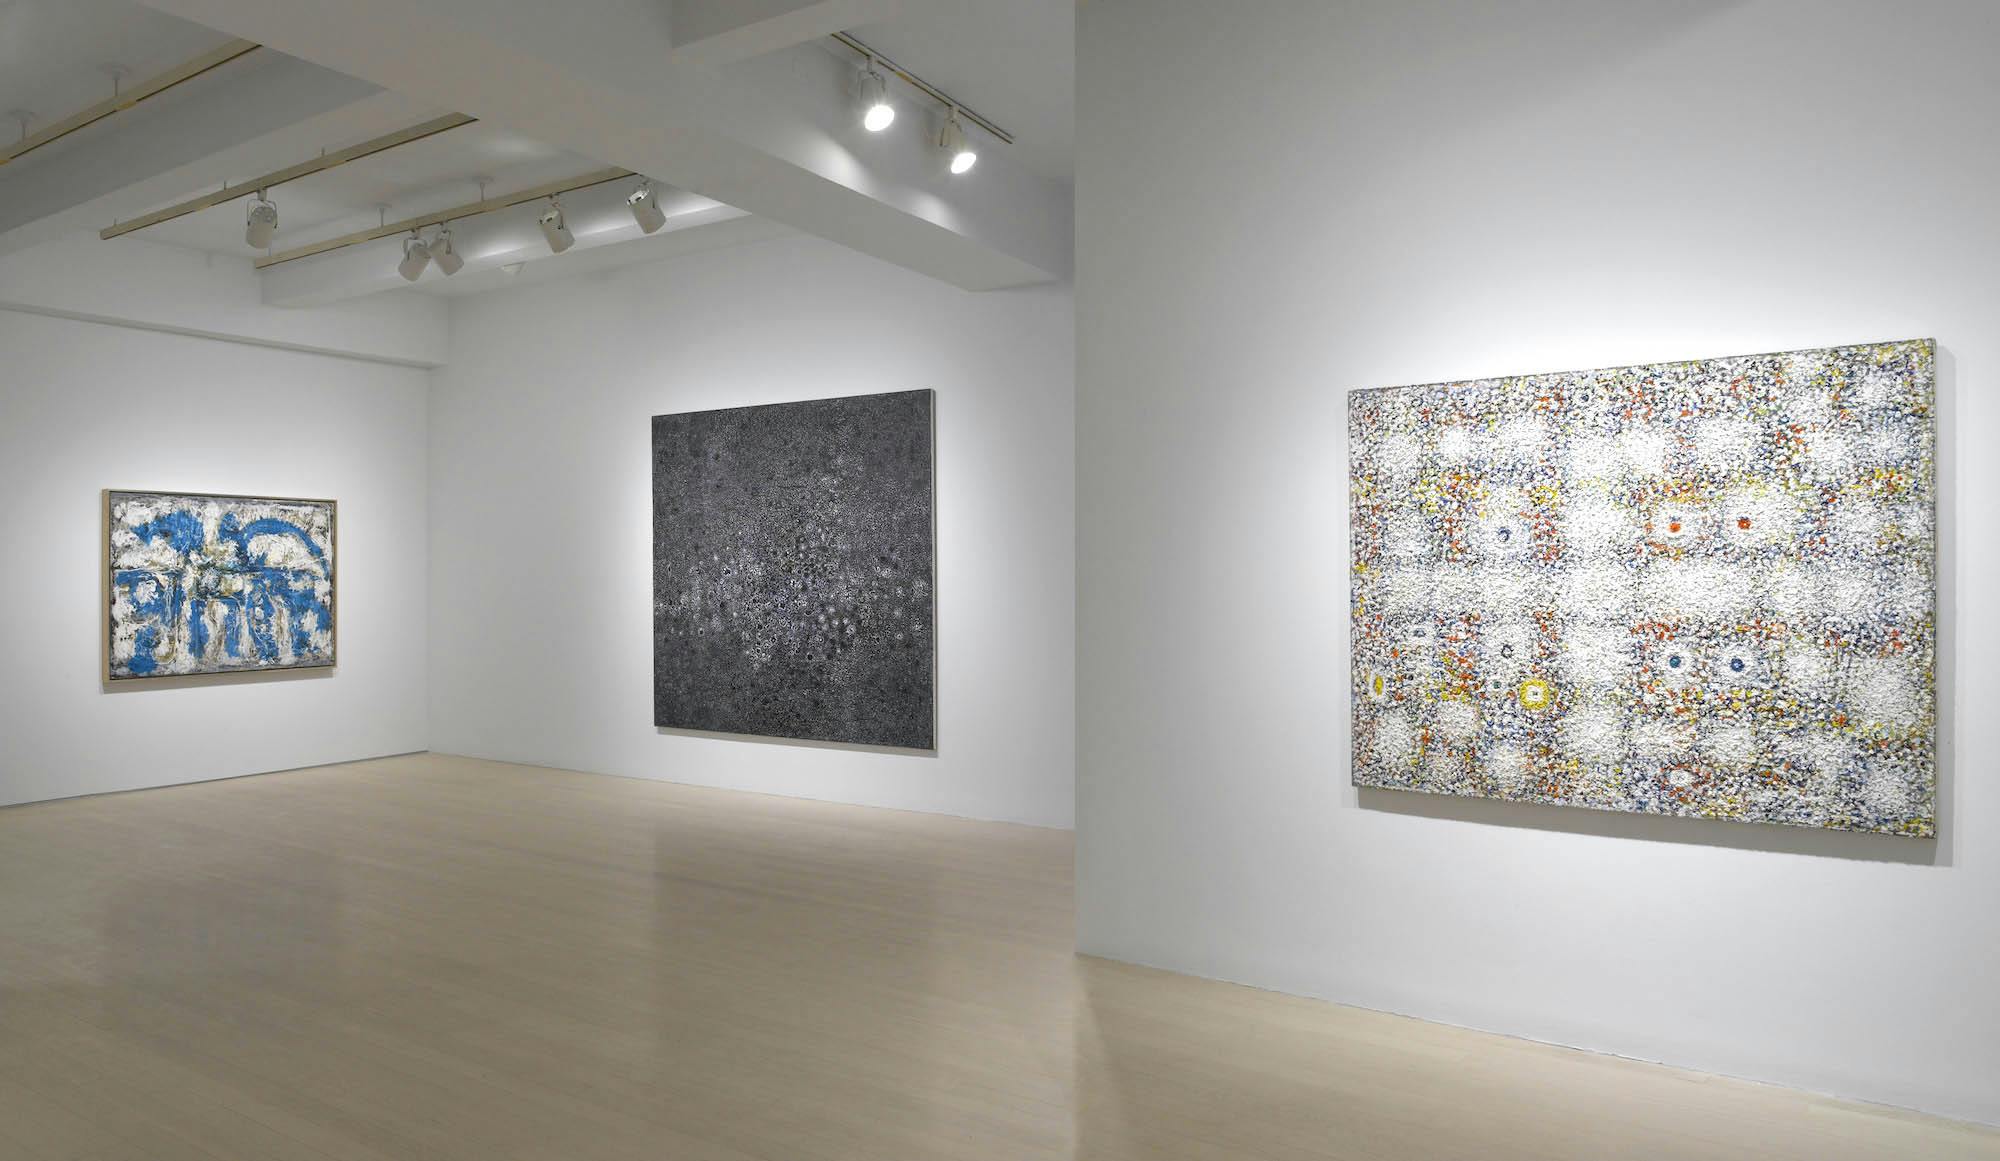 Installation view, Richard Pousette-Dart, The Centennial, Pace Gallery, New York, NY, 2016. – The Richard Pousette-Dart Foundation